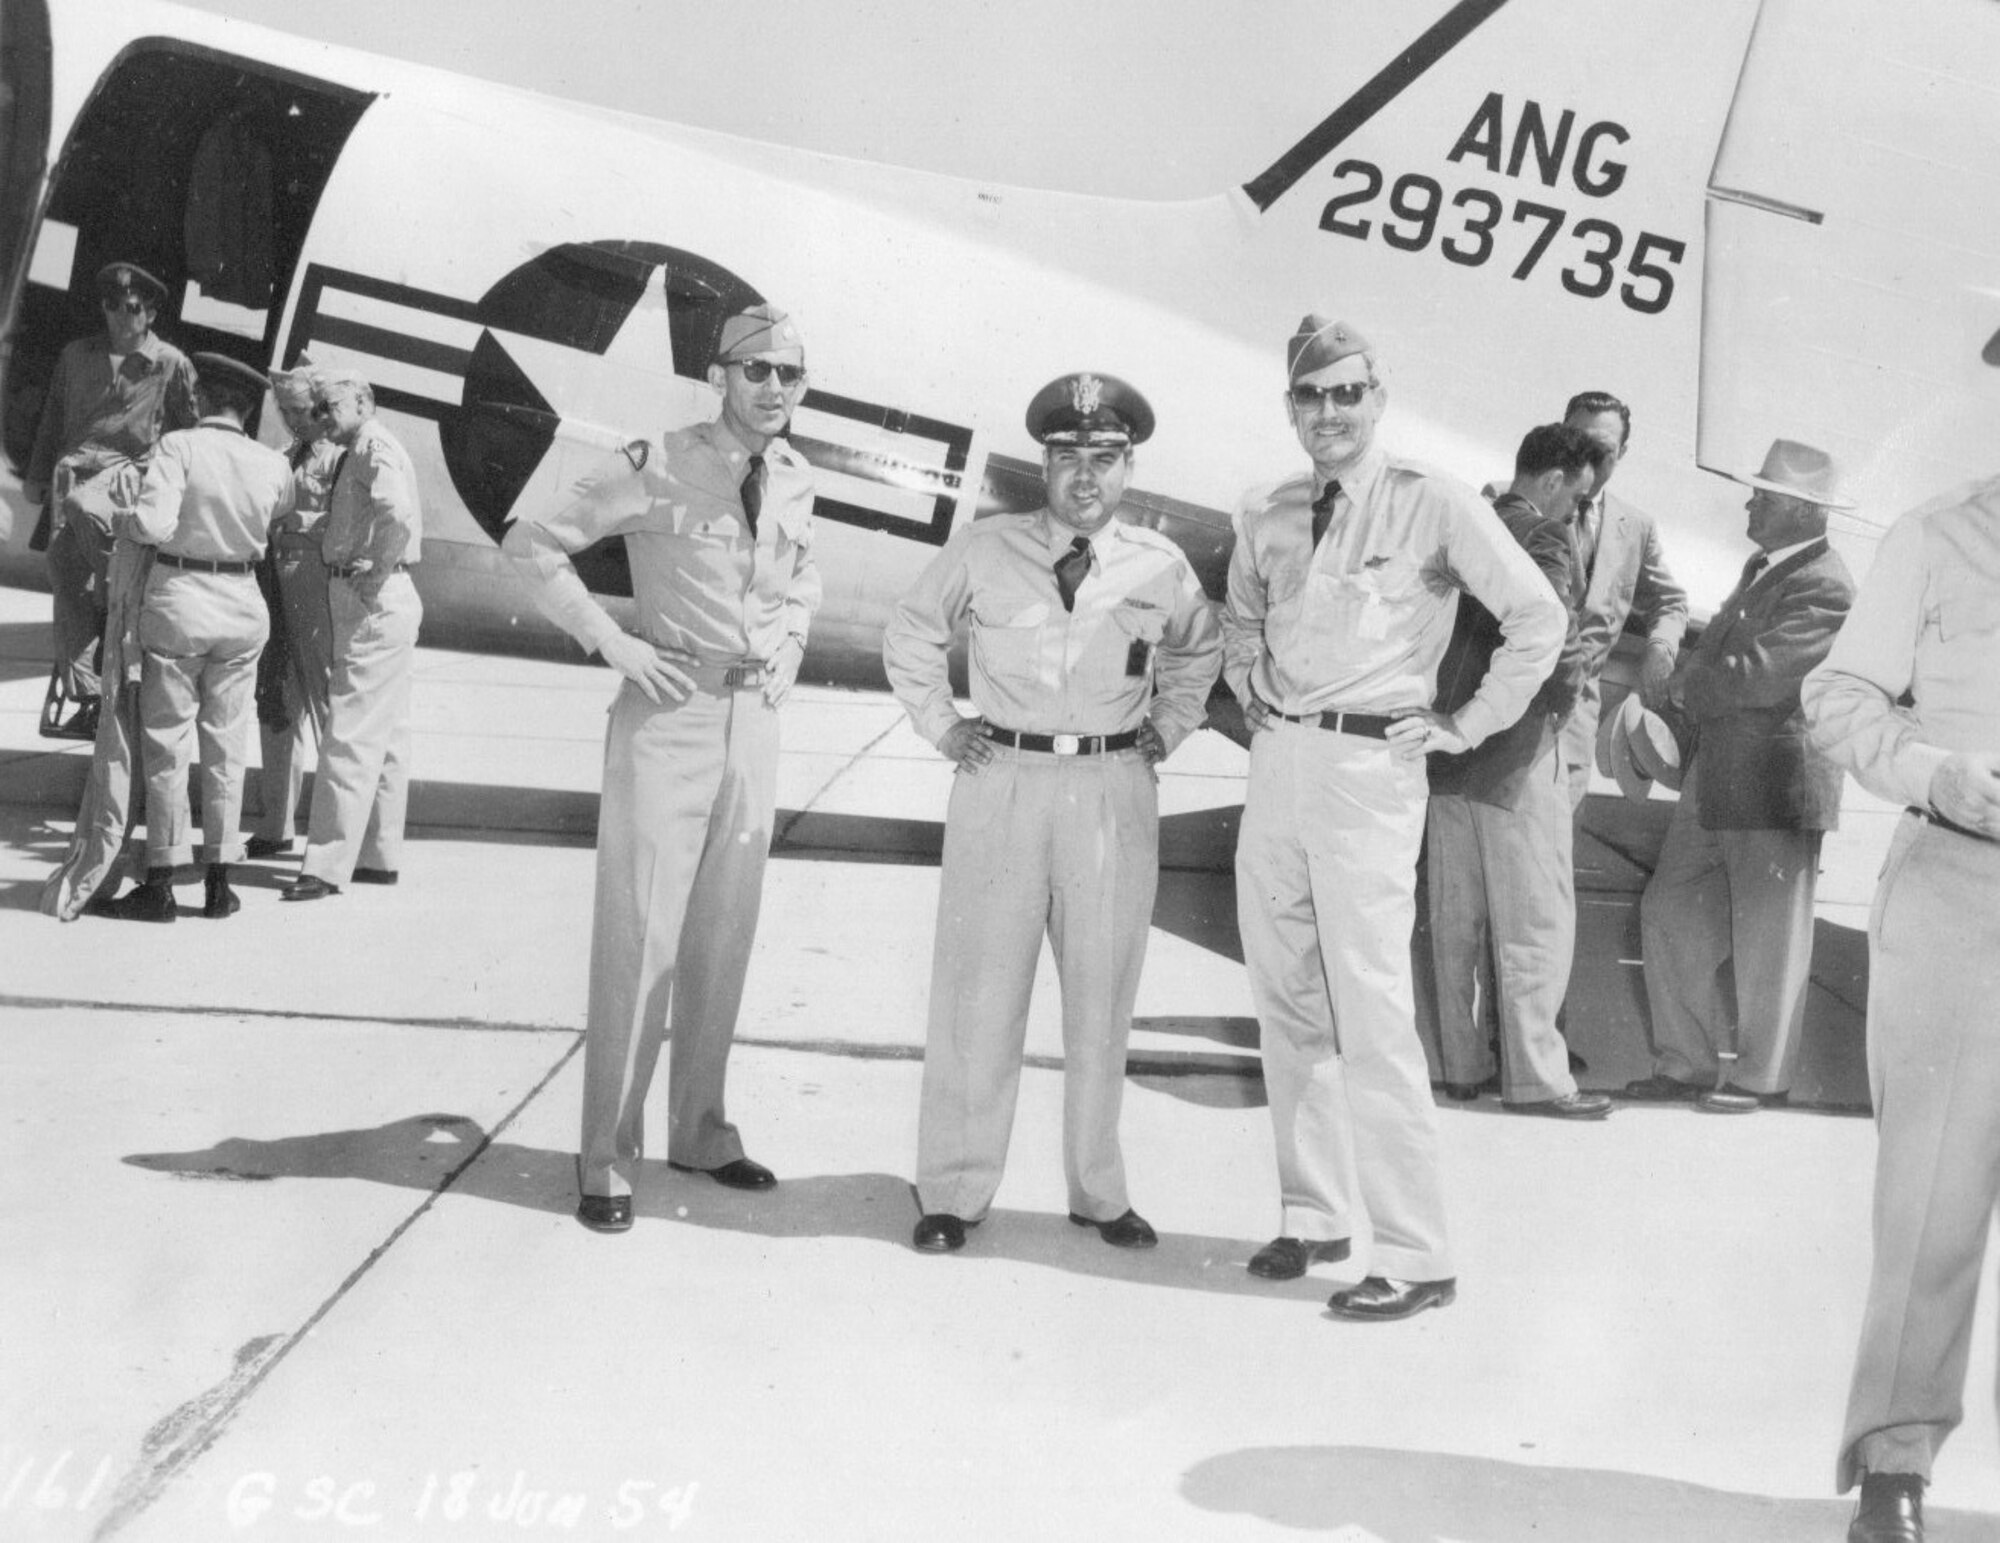 National Guard leaders on the ramp at Gowen Field, Idaho, June, 18 1954.  Left to right are an unidentified field grade officer with what may be the 41st Infantry Division emblem on his shoulder, Col. Frank W. Frost, Commander of the 142nd Fighter-Interceptor Wing, and Brig. Gen. G. Robert Dodson, Commander of the Oregon ANG.  (Courtesy 142FW History Archives)